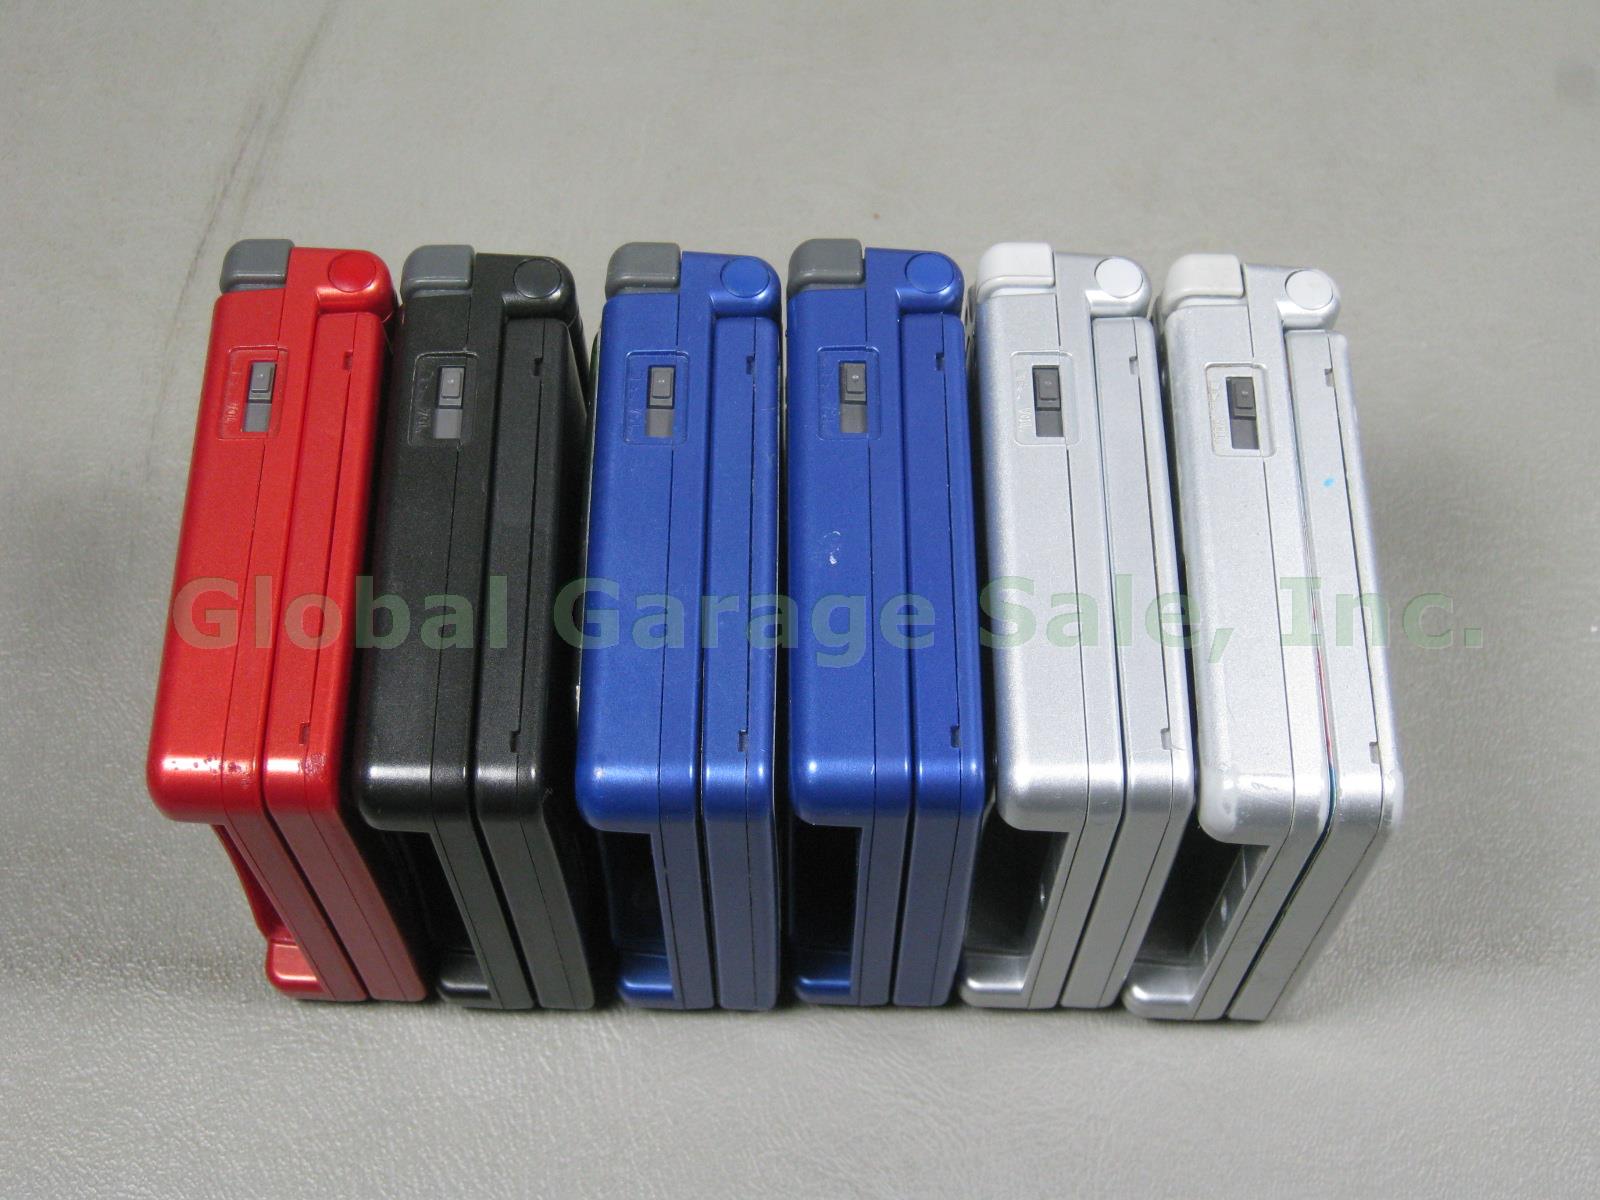 6 Nintendo Gameboy Advance GBA SP AGS-001 Consoles System Collection Bundle Lot 3